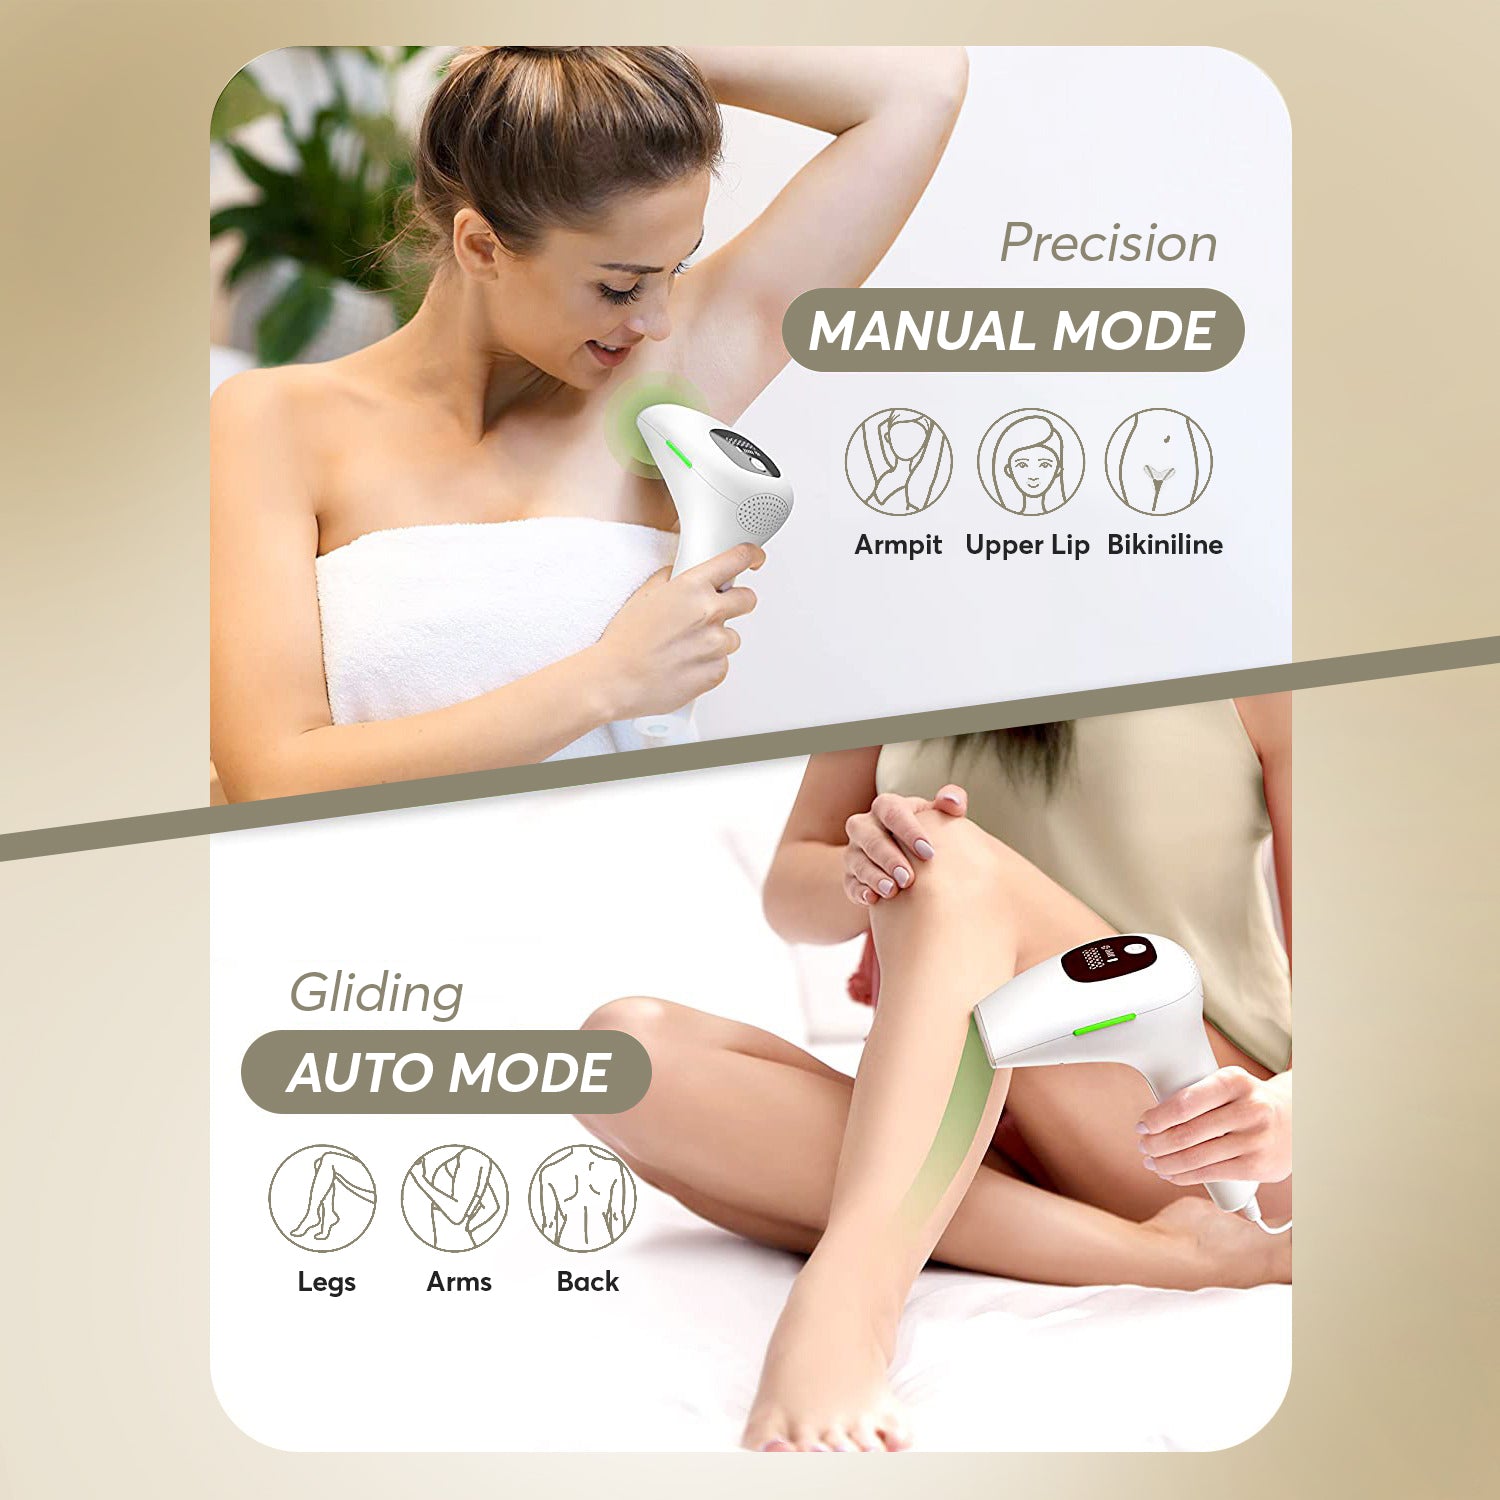  Laser IPL Hair Removal, IPL Hair Removal for Women and